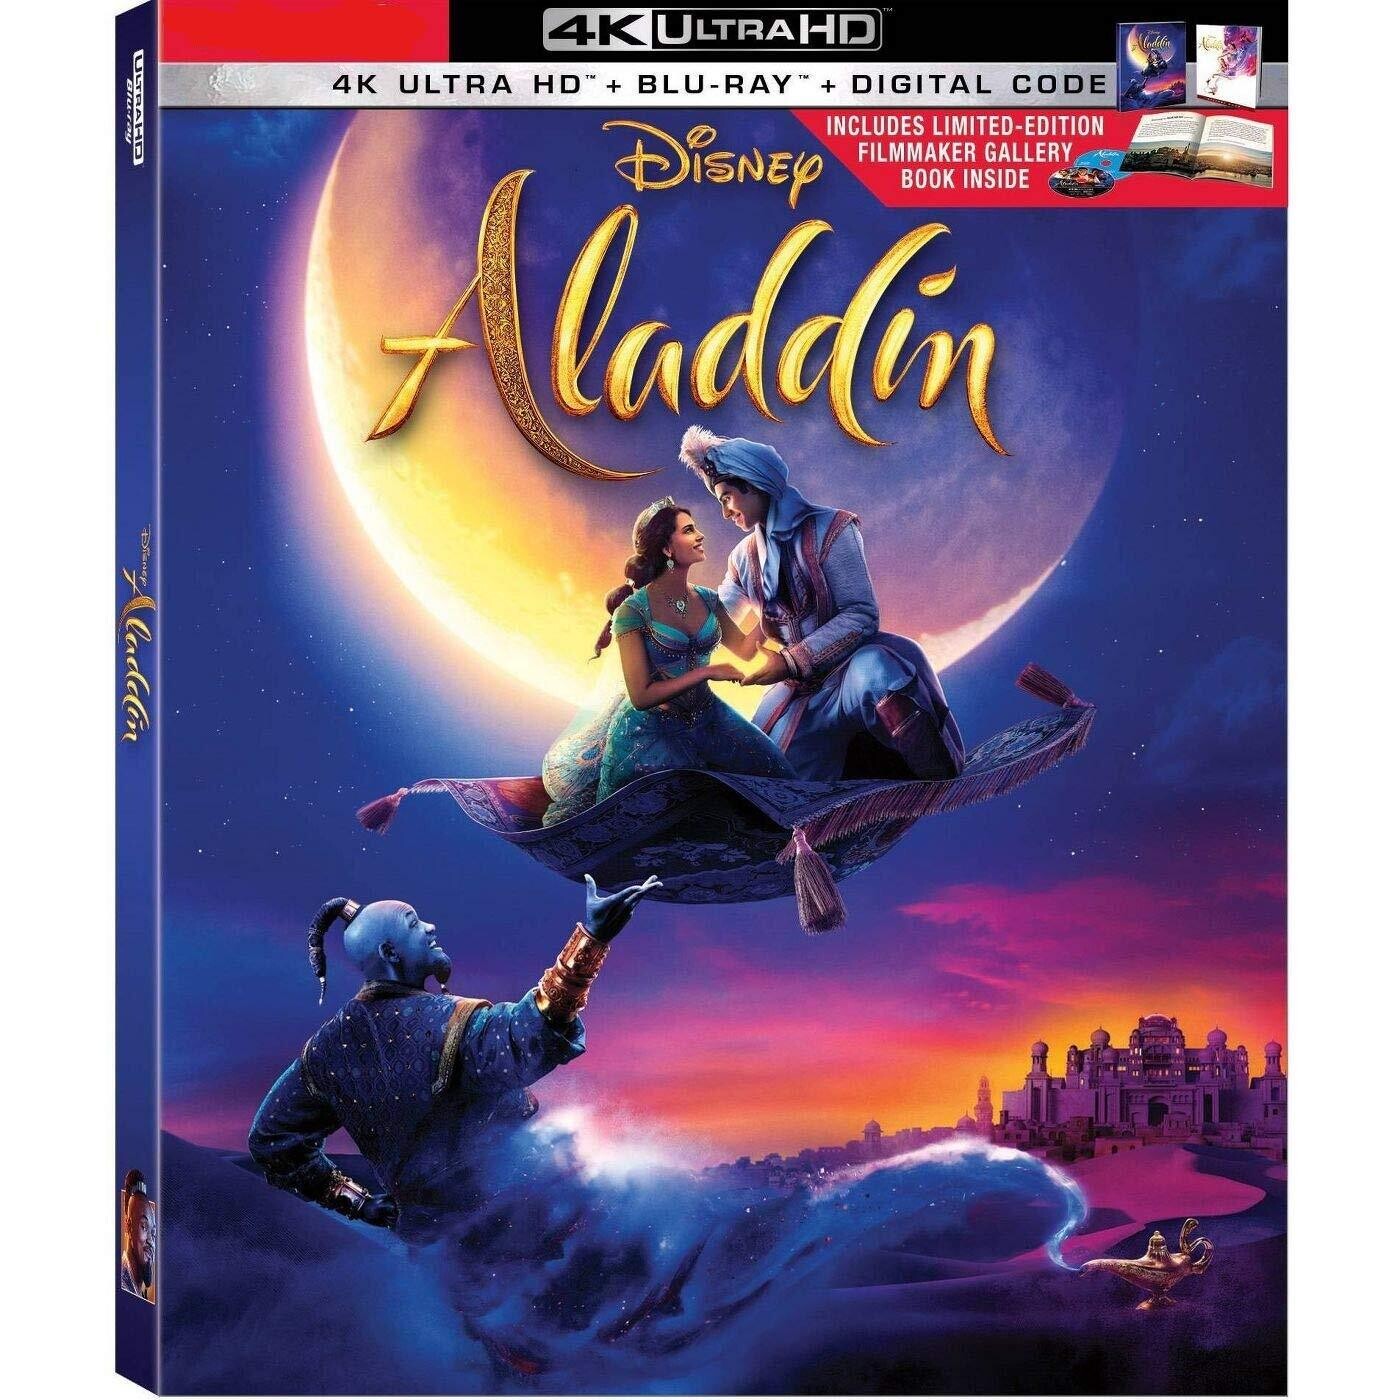 Aladdin : Live Action [2019] 4K Ultra HD + Blu-ray + Digital Steelbook [with Filmmaker Gallery Book] [Target Exclusive]